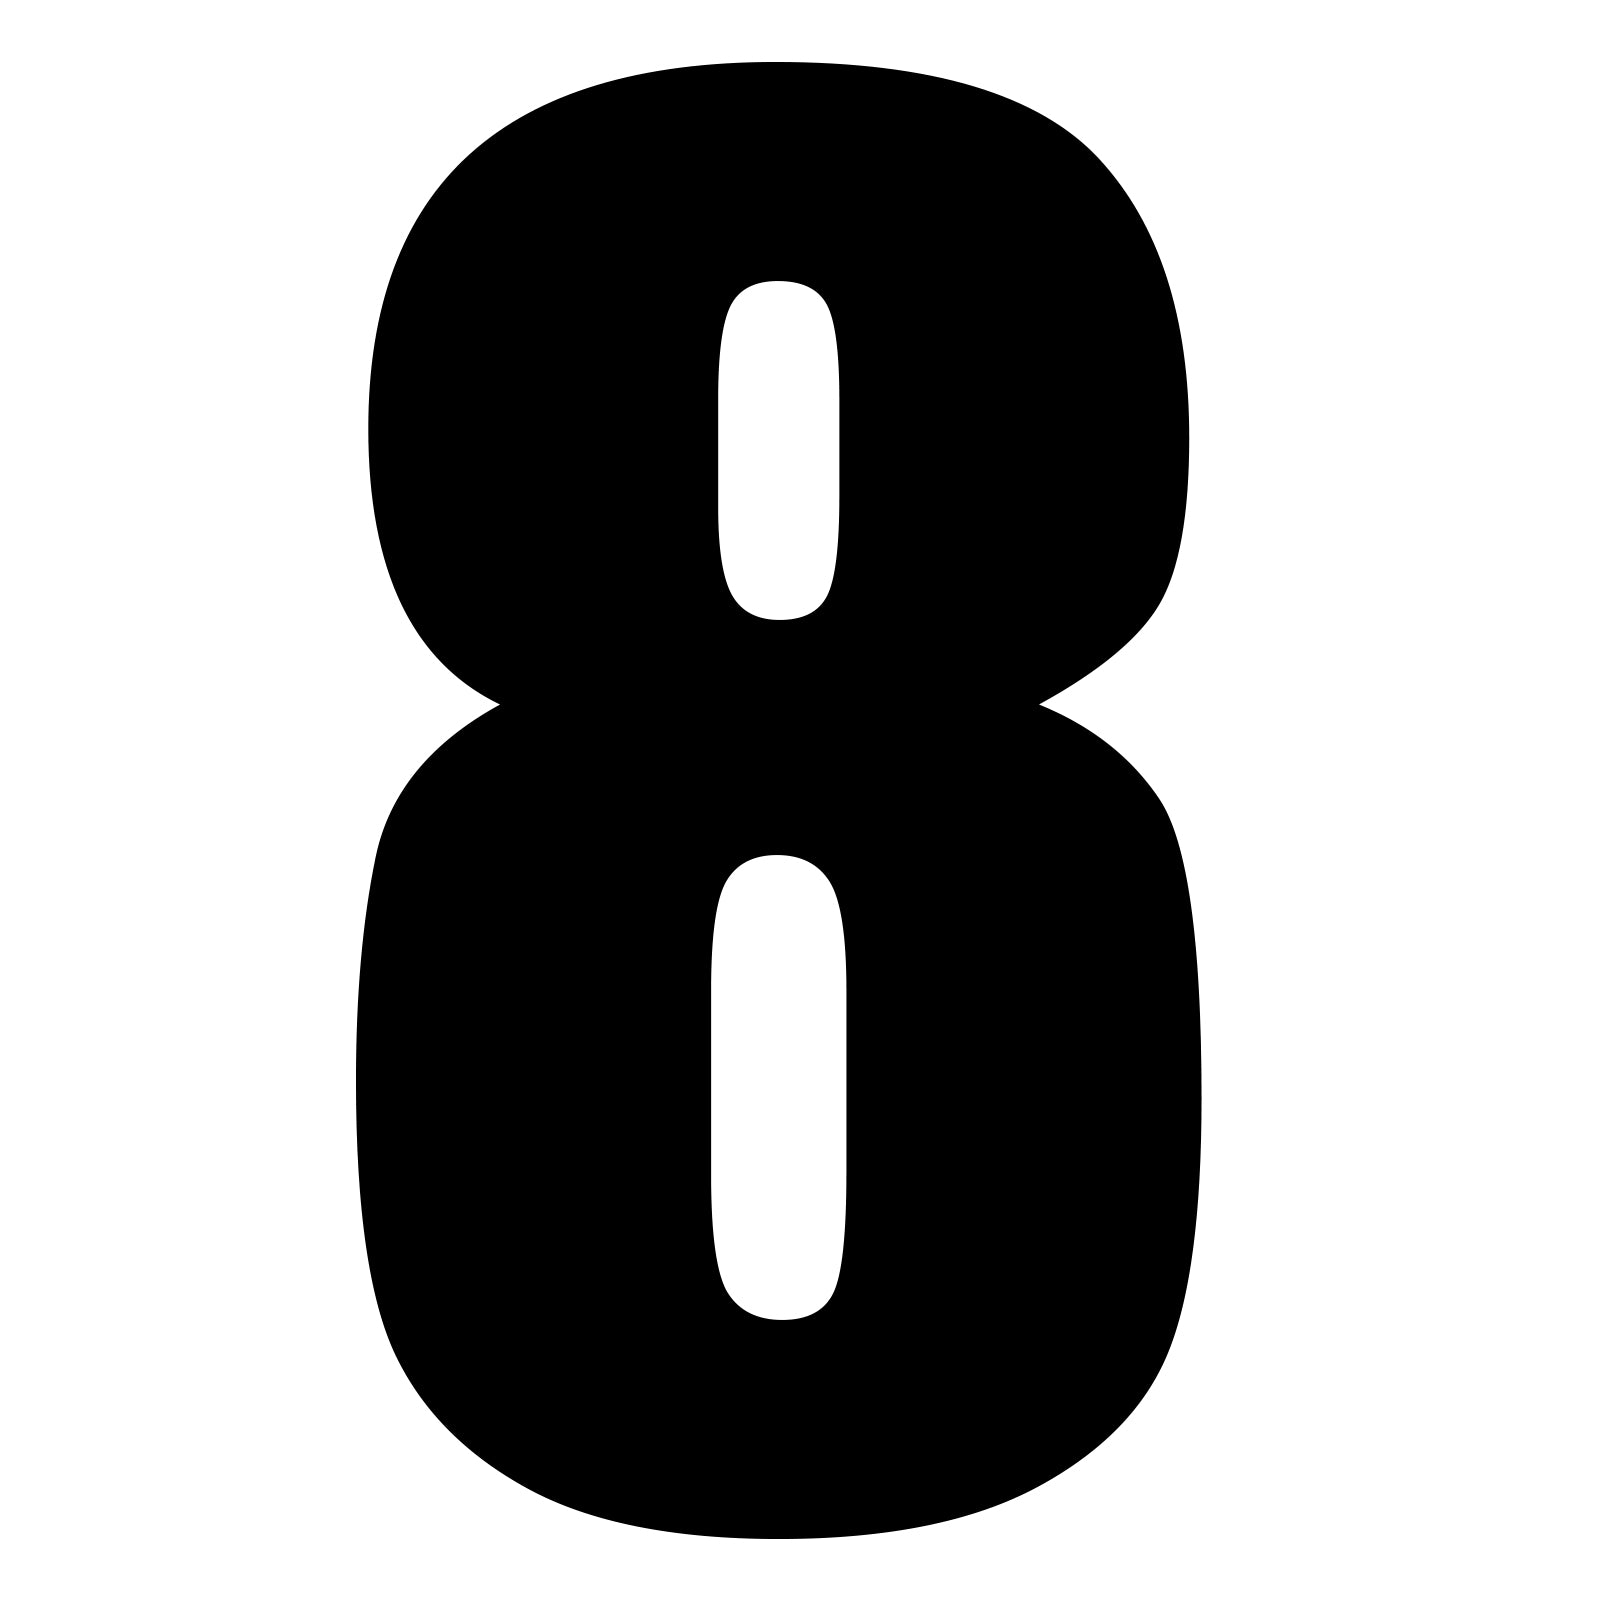 Whites Motorcycle Parts, Whites Race Number - Black #8 (10 Pack)